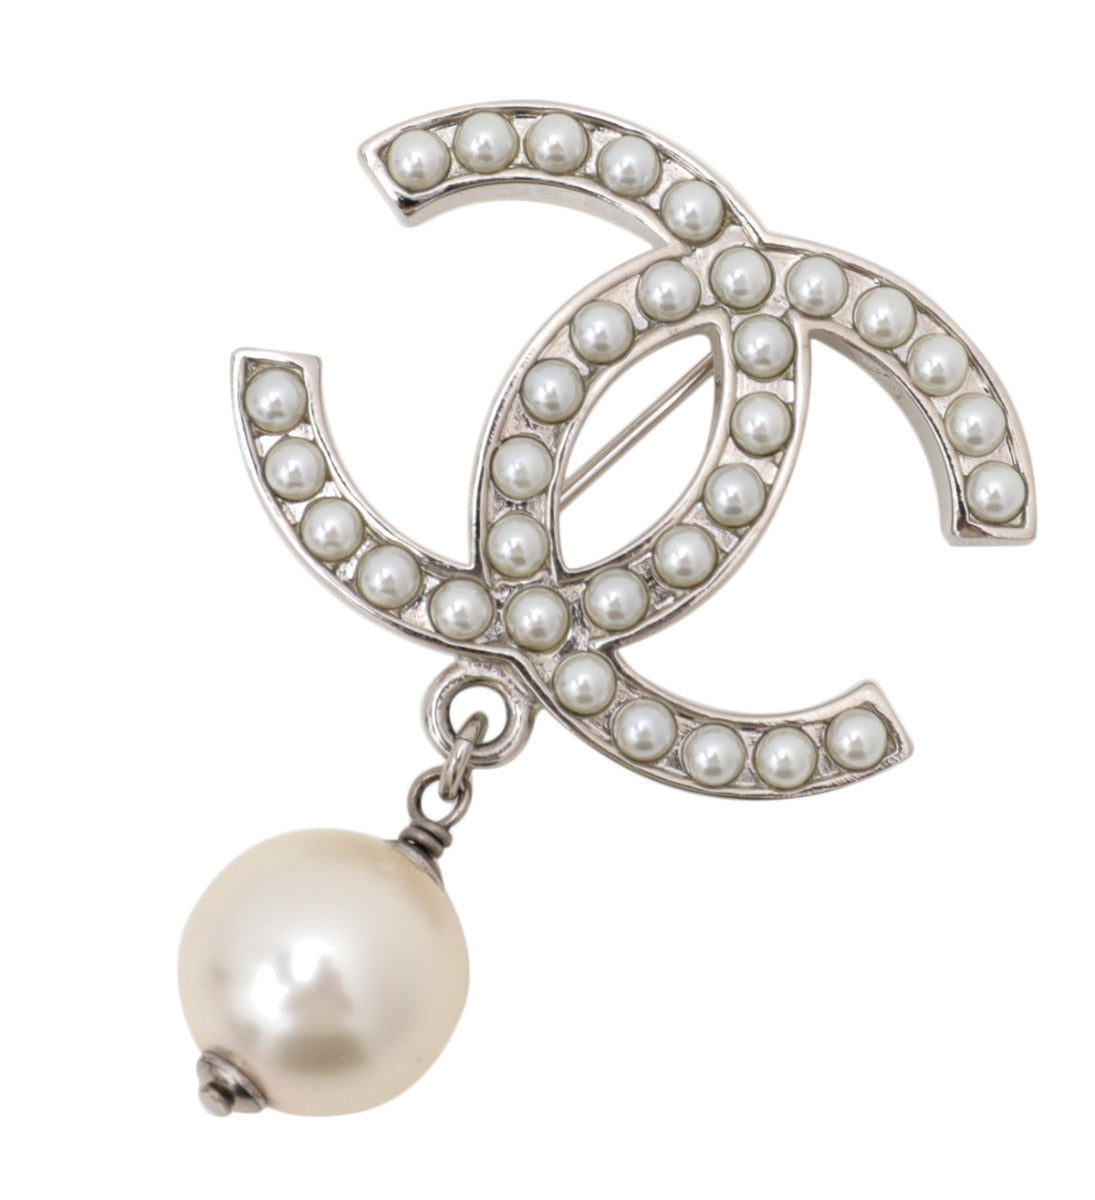 Chanel Pearl CC Brooch – The Champagne Diet Boutique